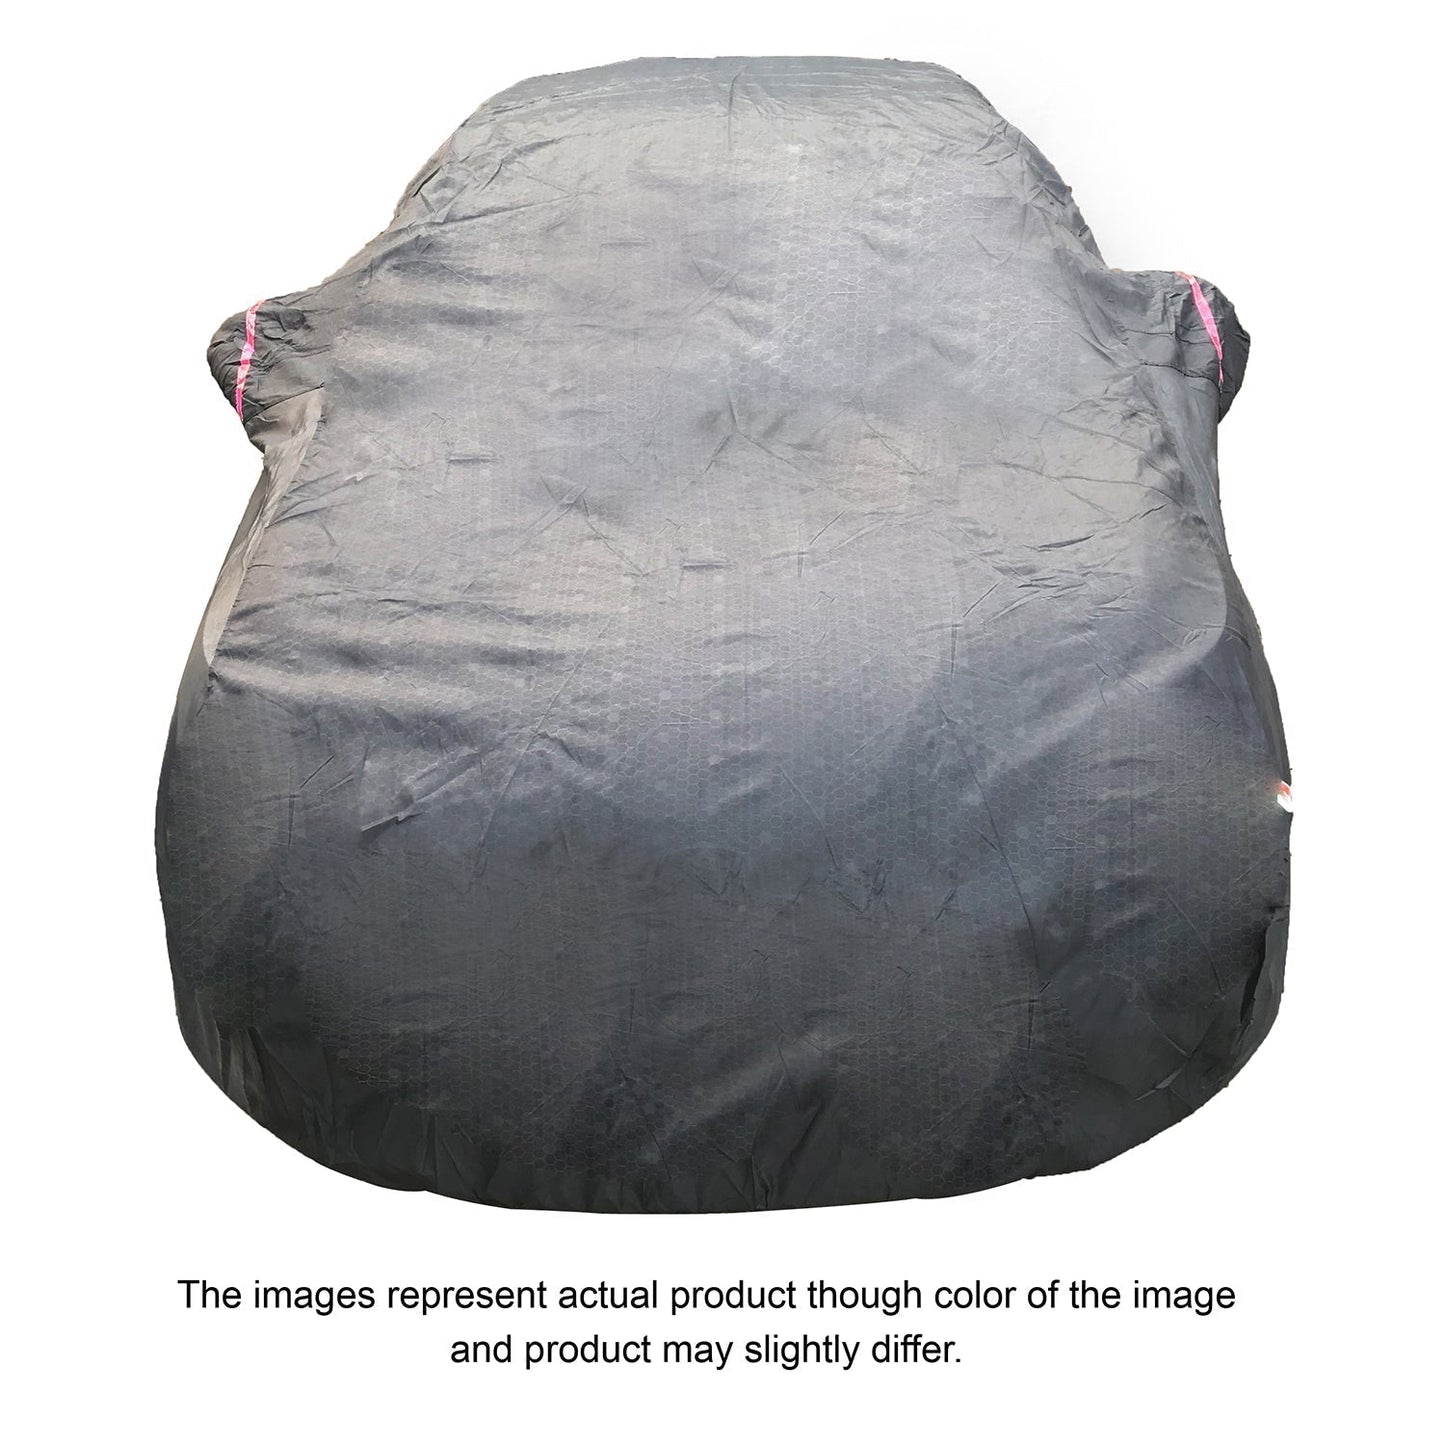 Oshotto 100% Dust Proof, Water Resistant Grey Car Body Cover with Mirror Pockets For MG Astor